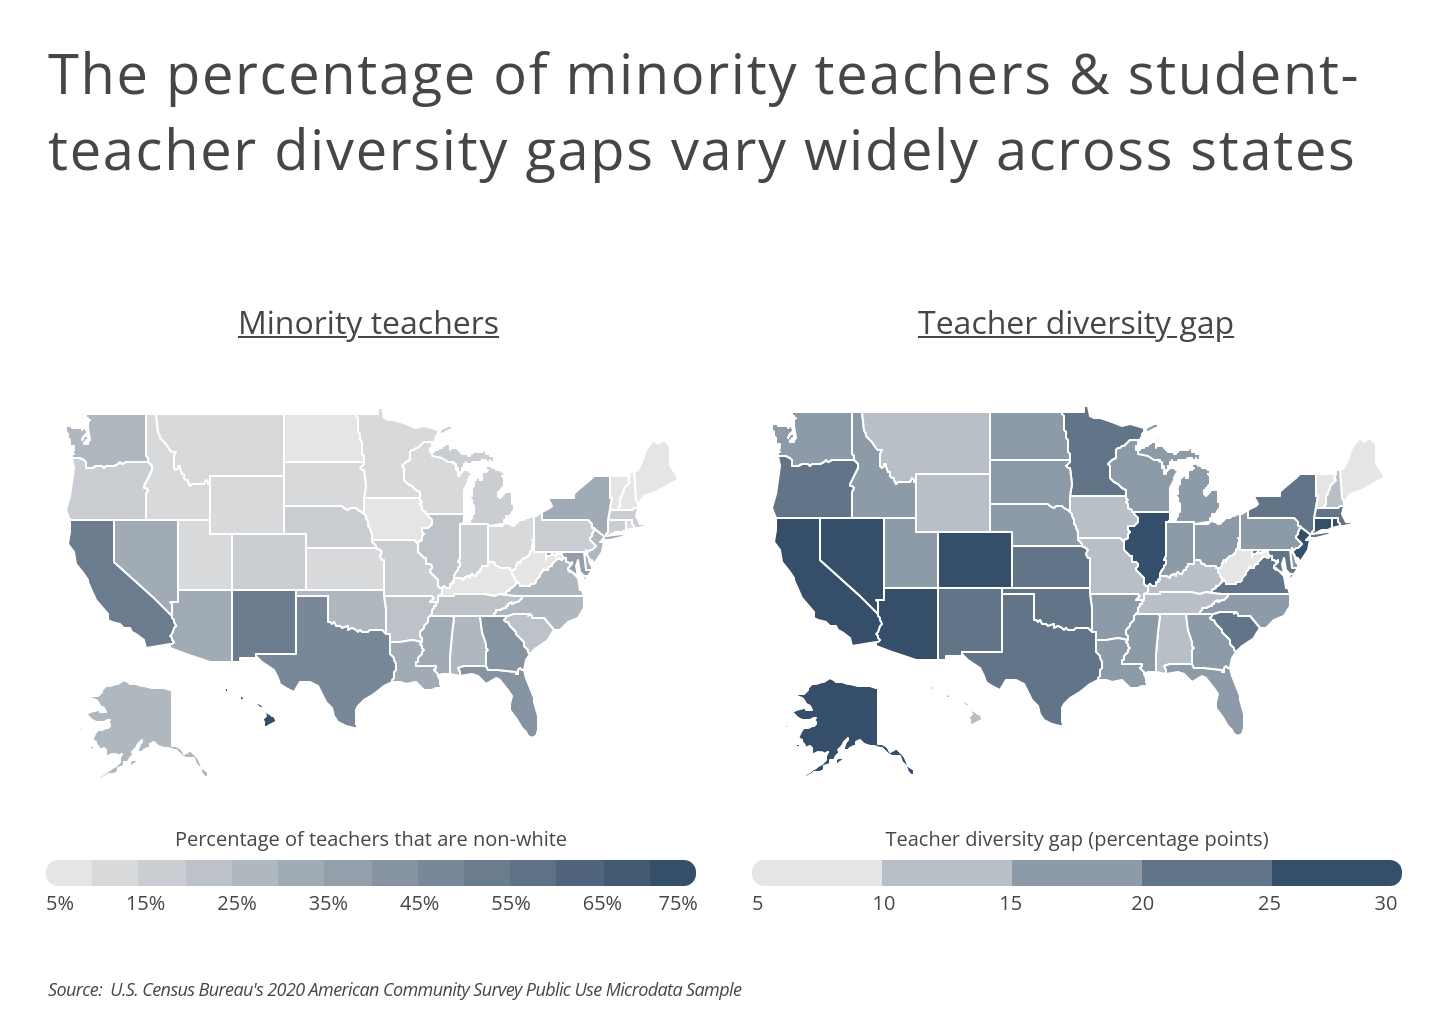 Chart2_The percentage of minority teachers varies widely across states